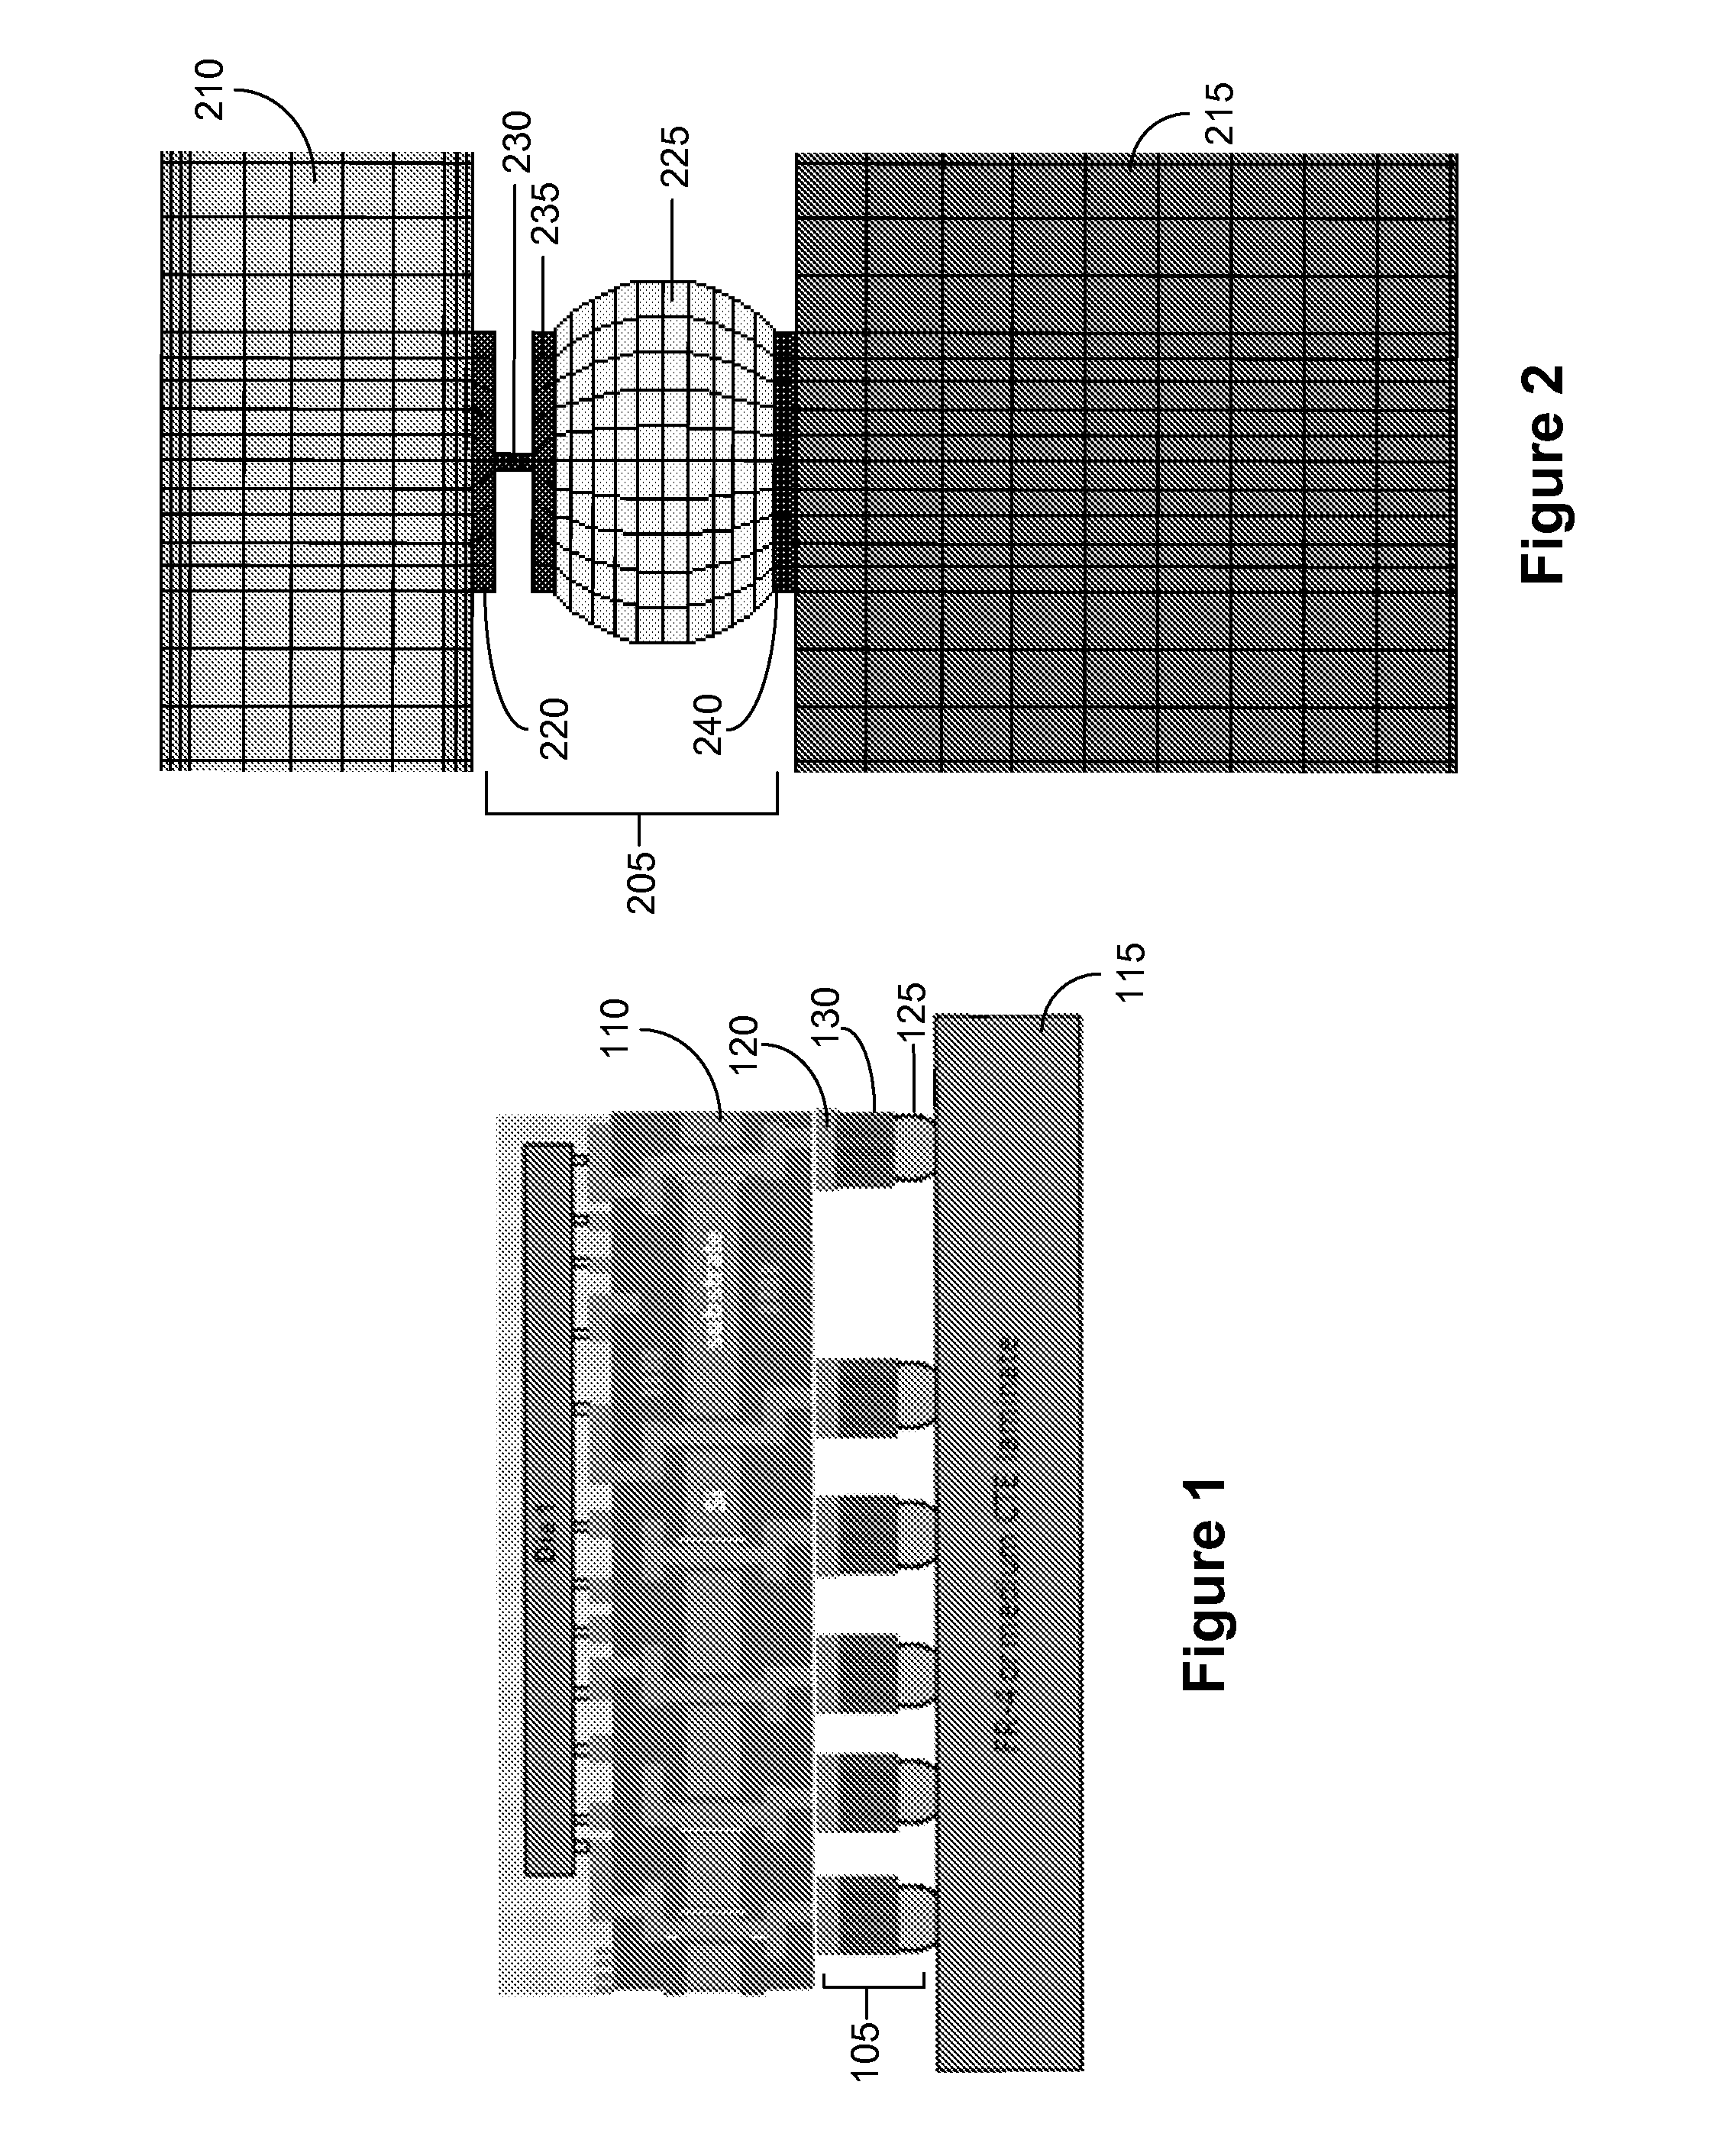 Stress relieving second level interconnect structures and methods of making the same